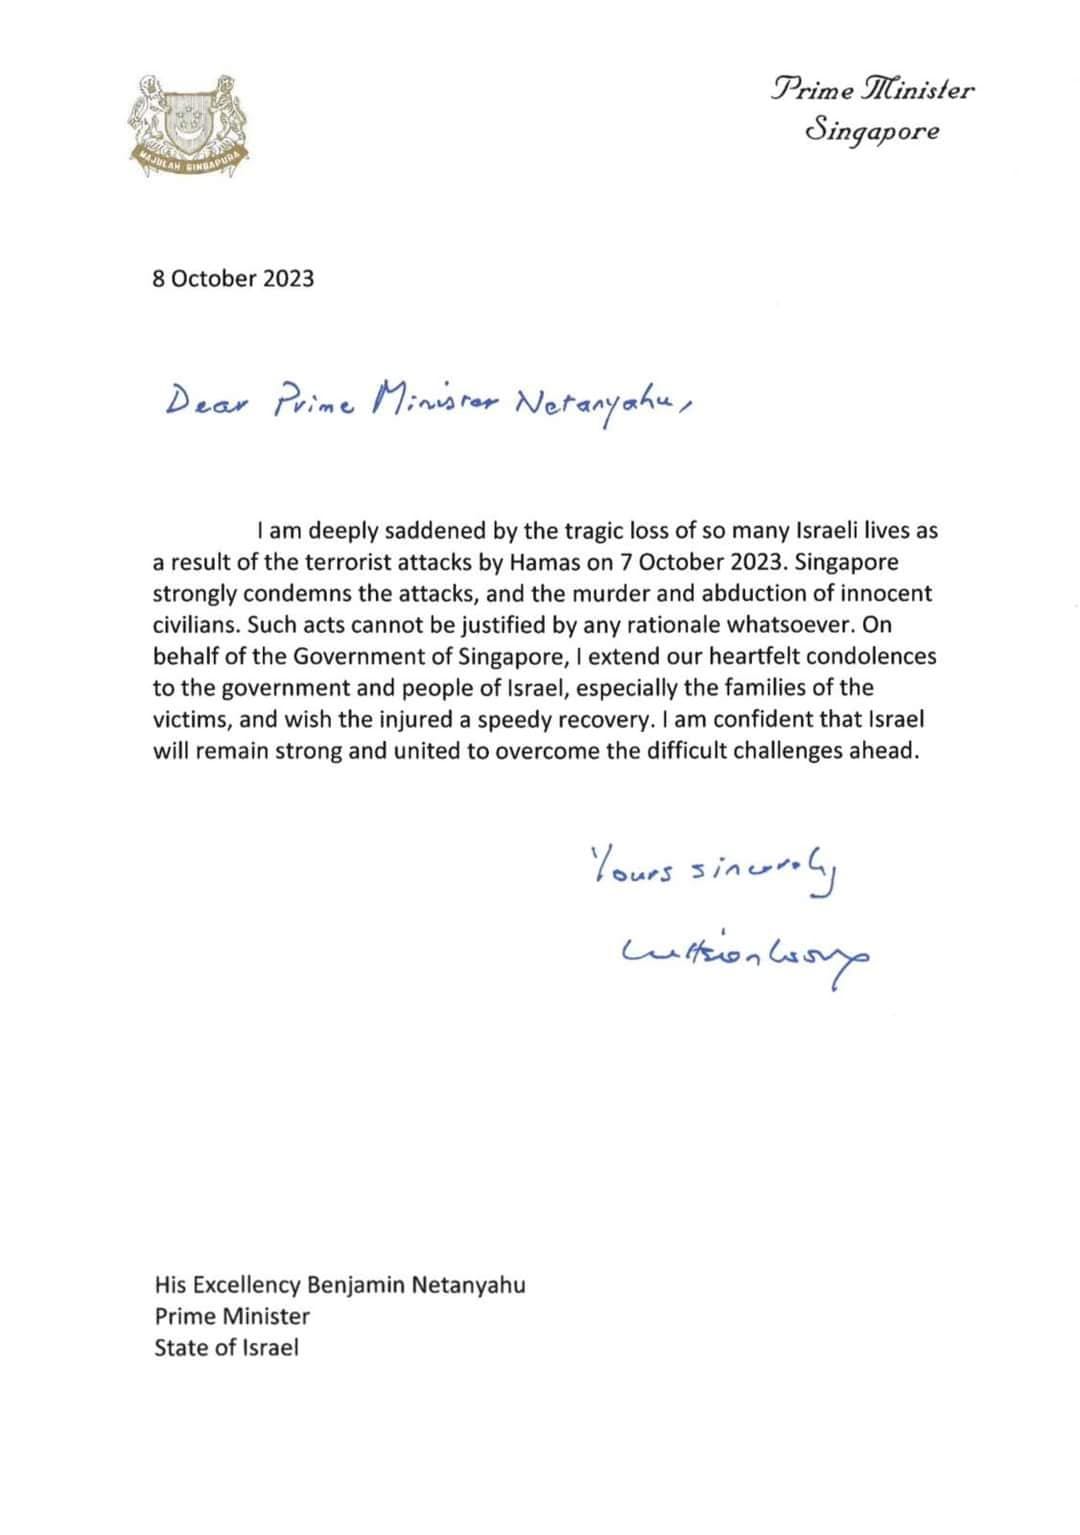 May be an image of text that says "Prime Minister Singapore 8 October 2023 Dear Prime Minister Neranyahu, am deeply saddened by the tragic loss many Israeli lives a result of he terrorist attacks by Hamas October 2023. Singapore strongly condemns the attacks, and he murder and abduction innocent civilians. Such acts cannot justified any rationale whatsoever. behalf the Government of Singapore, extend heartfelt condolences the government and people Israel, especially the families the victims, wish injured speedy recovery. am confident that Israel remain strong and united to overcome difficult challenges ahead. Yours sinunl catkiontasy His Excellency Benjamin Netanyahu Prime Minister State Israel"